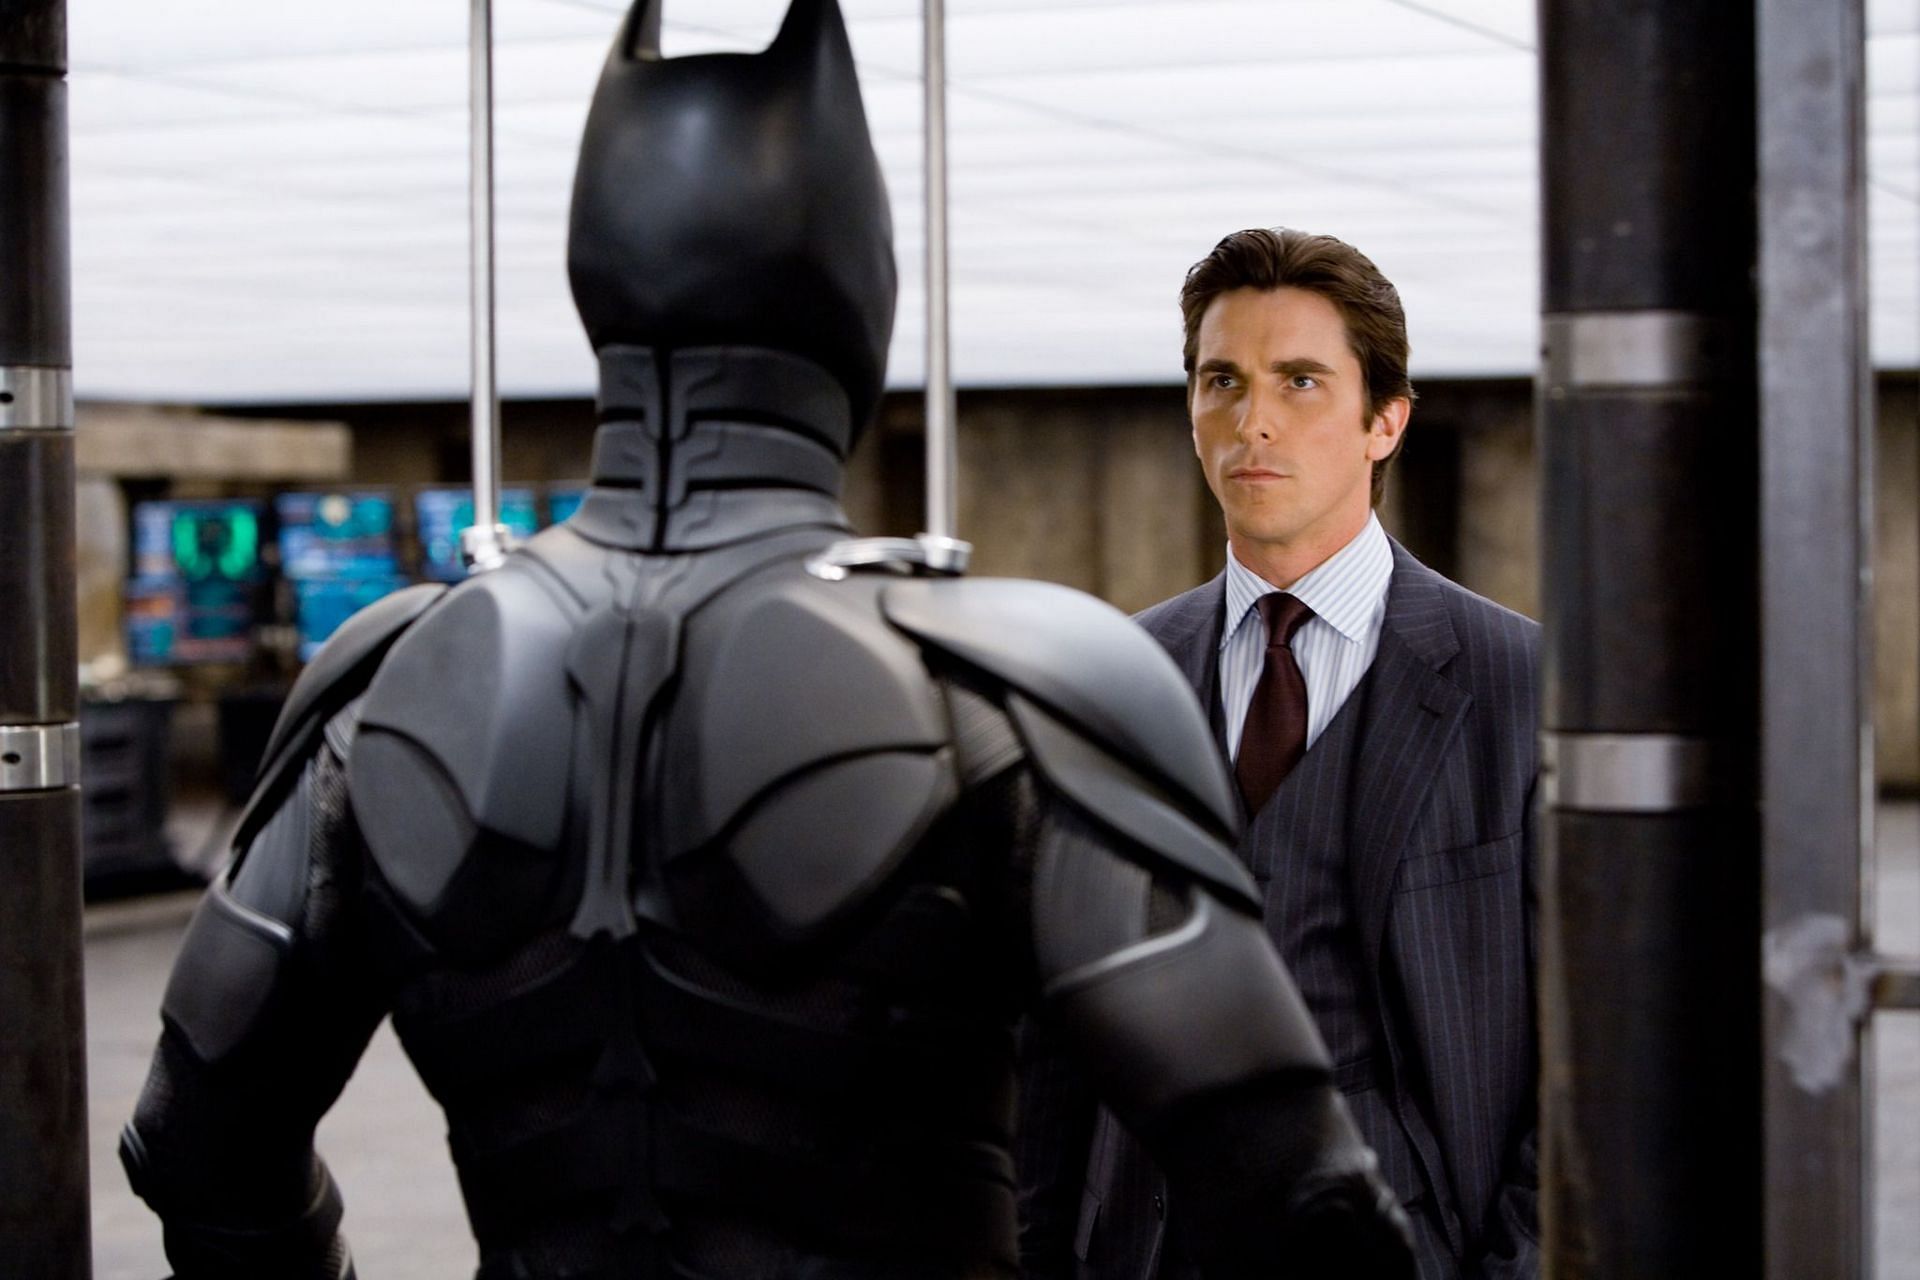 Could Christian Bale&#039;s grounded portrayal of Batman clash with the fantastical world of Flash? (Image via Warner Bros)